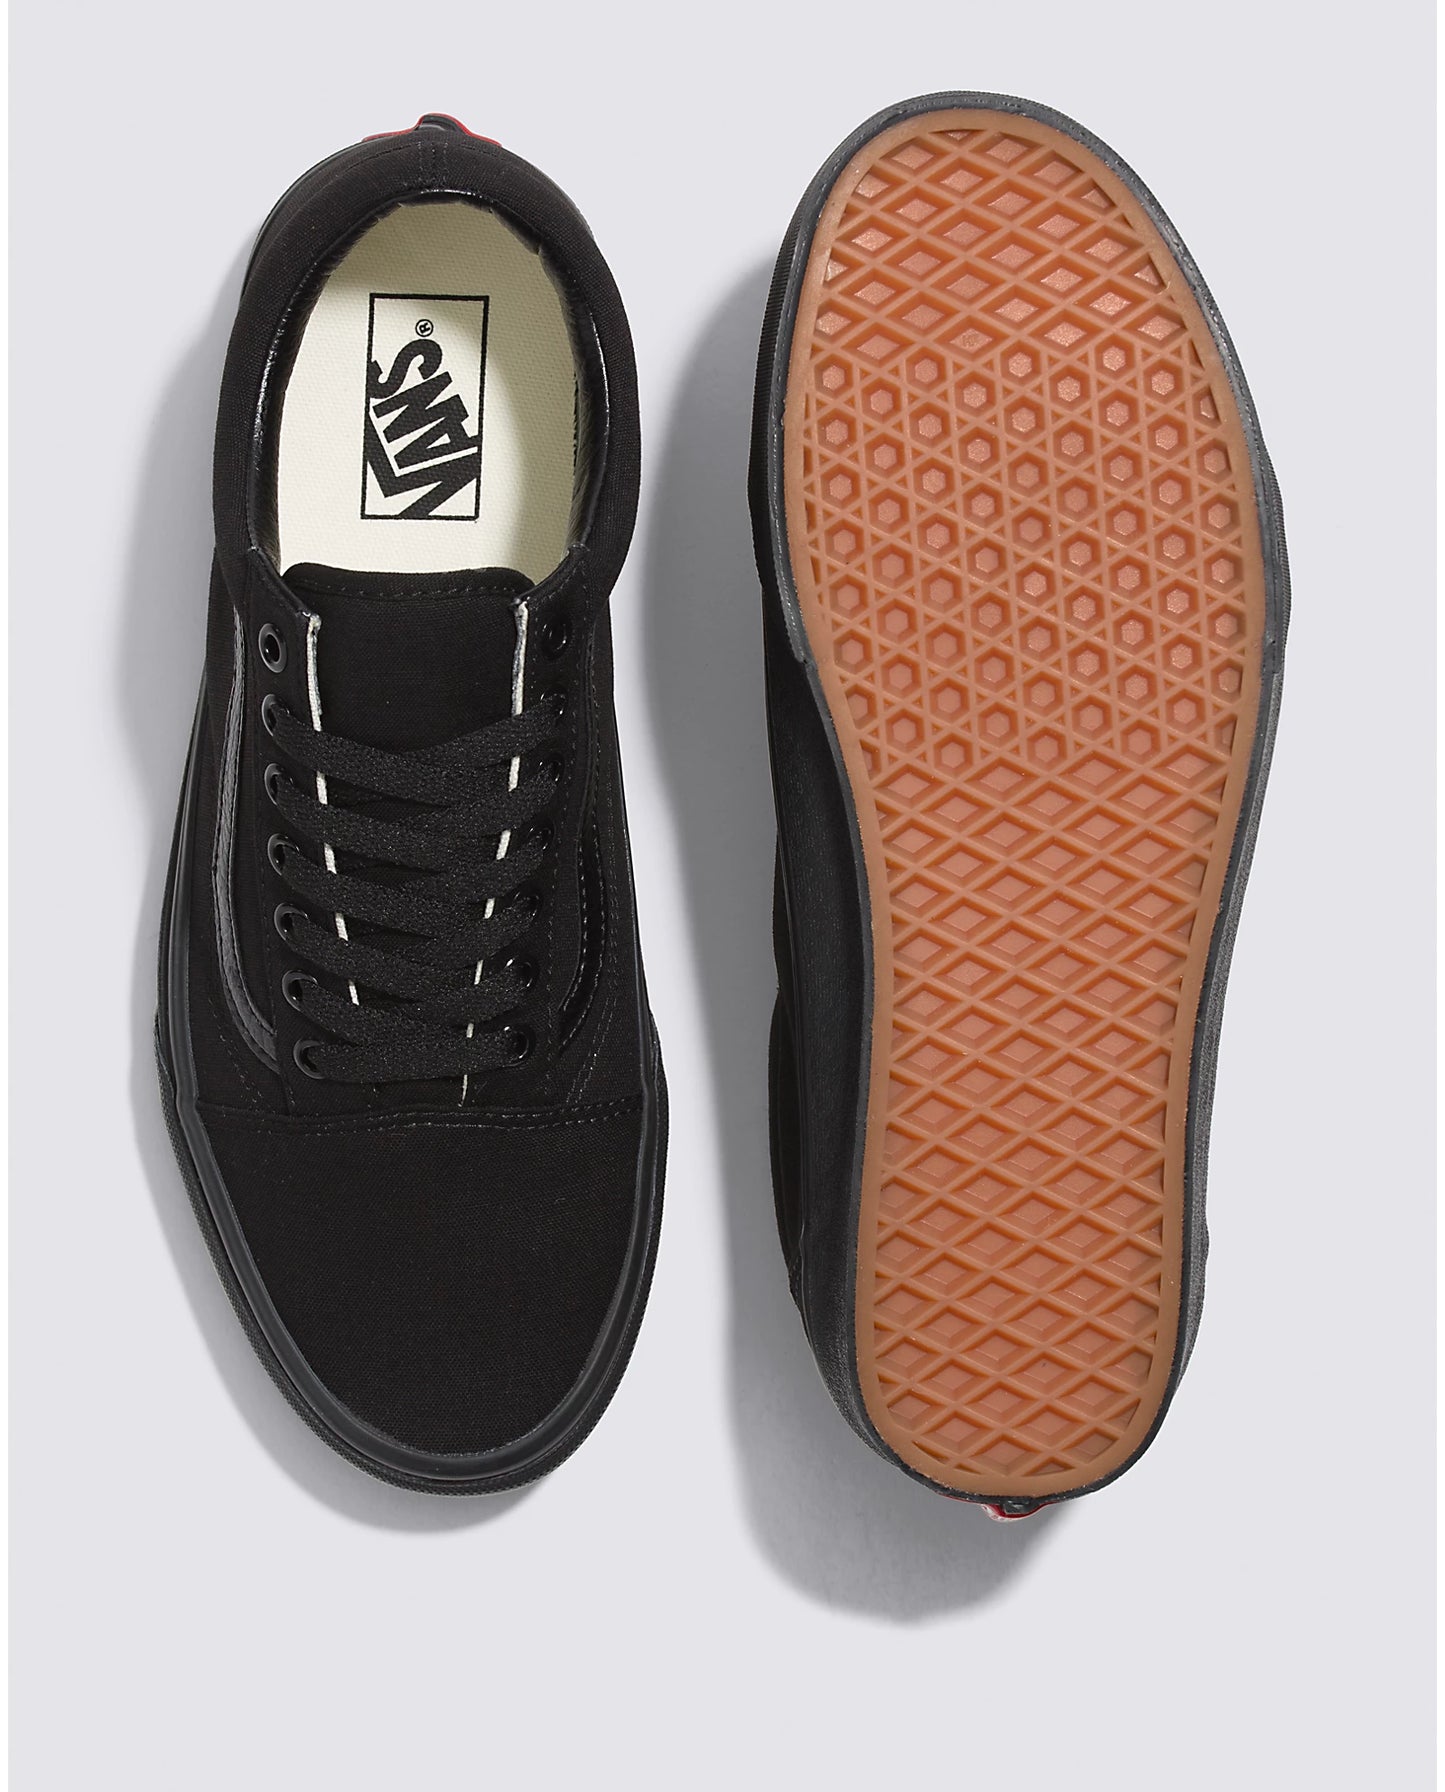 Top and bottom flat lay view of the Vans Men's all black Canvas Old Skool Sneaker